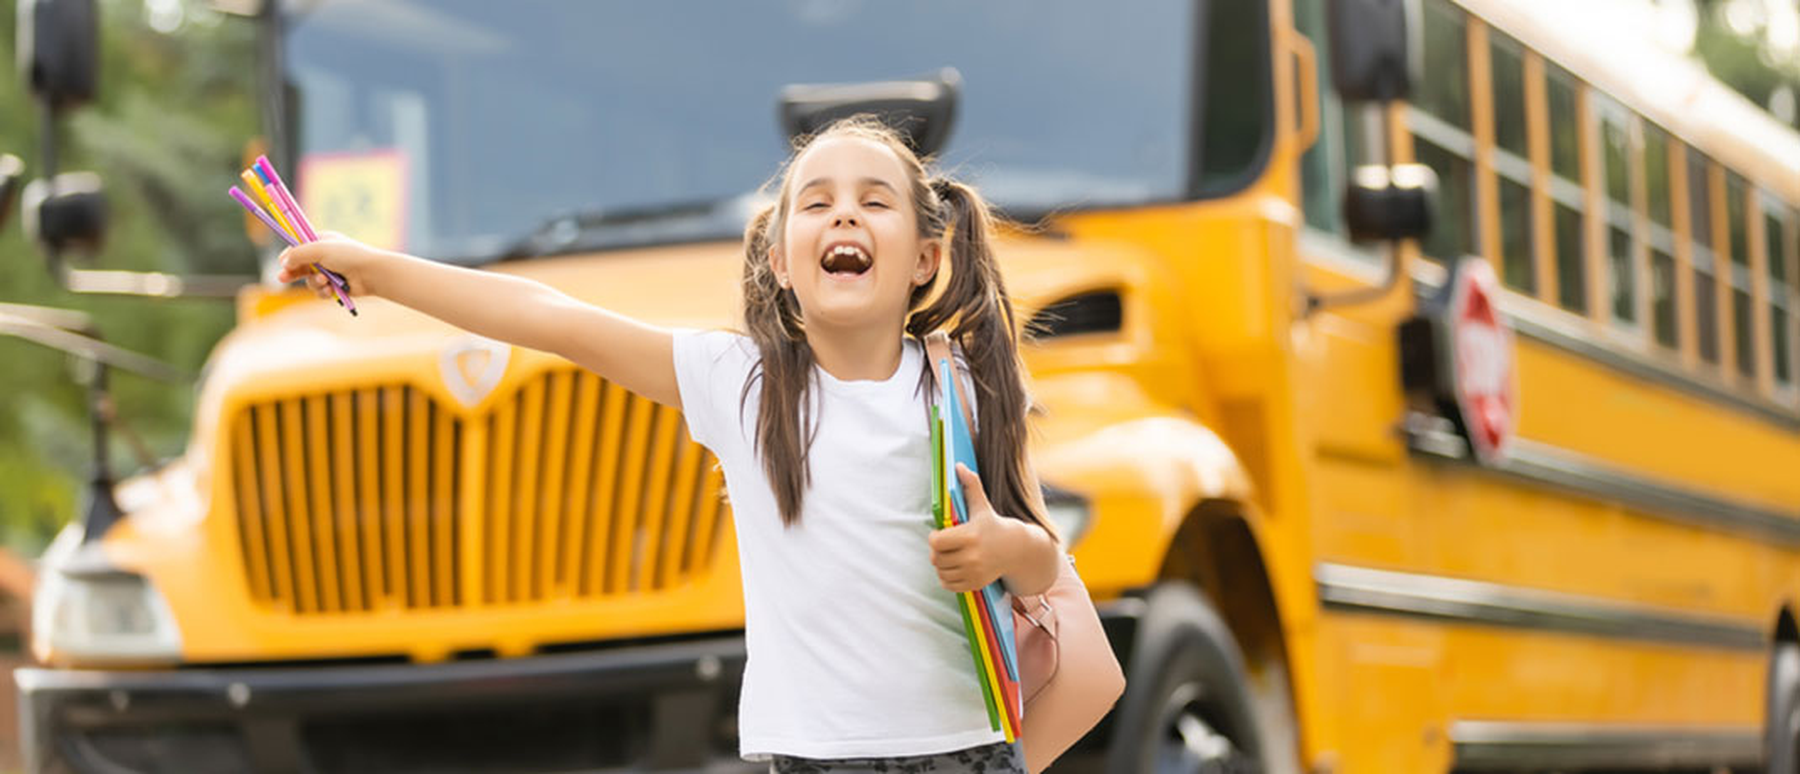 Smiling girl in front of a yellow school bus